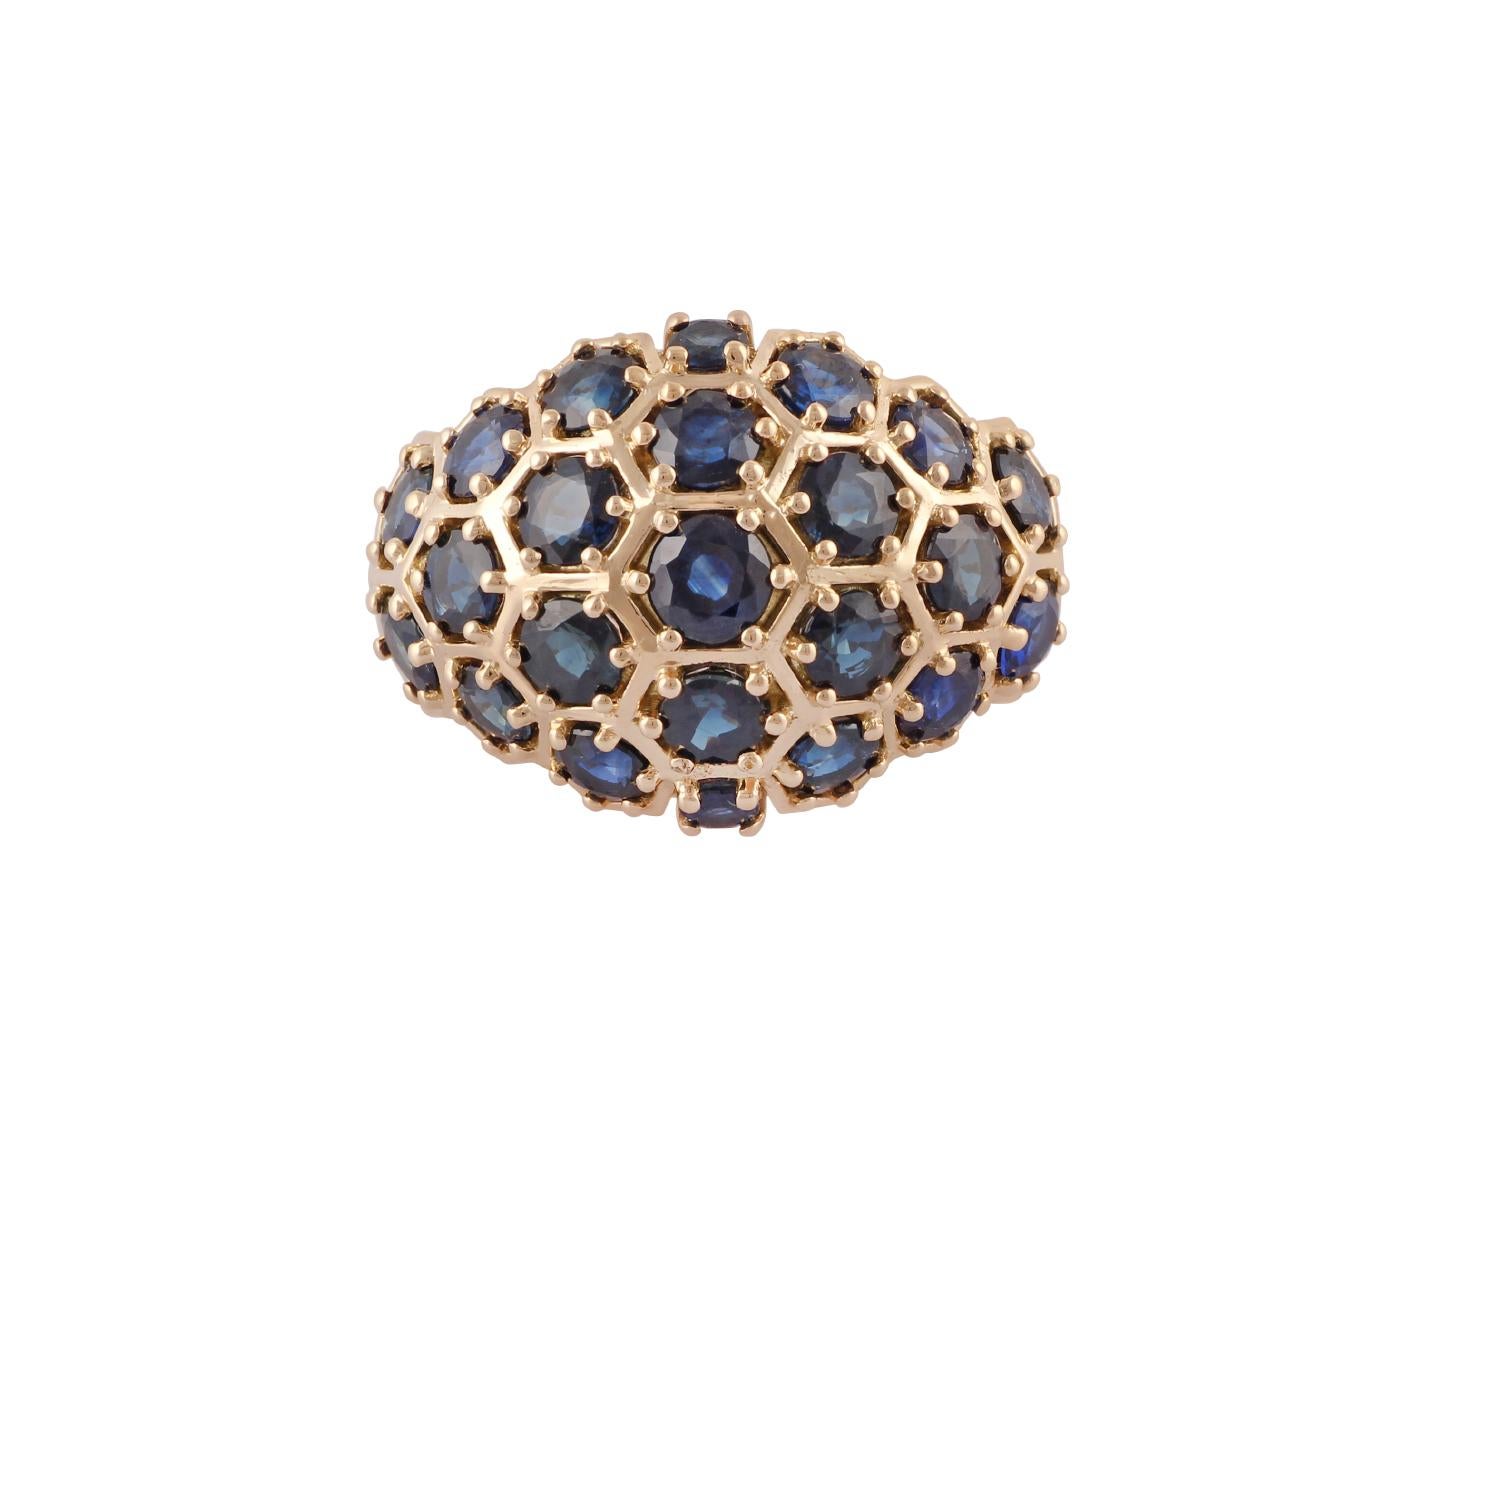 Sapphire = 6.11 Carat

Metal: 18K Yellow Gold
Ring Size: 7* US
*It can be resized complimentary
